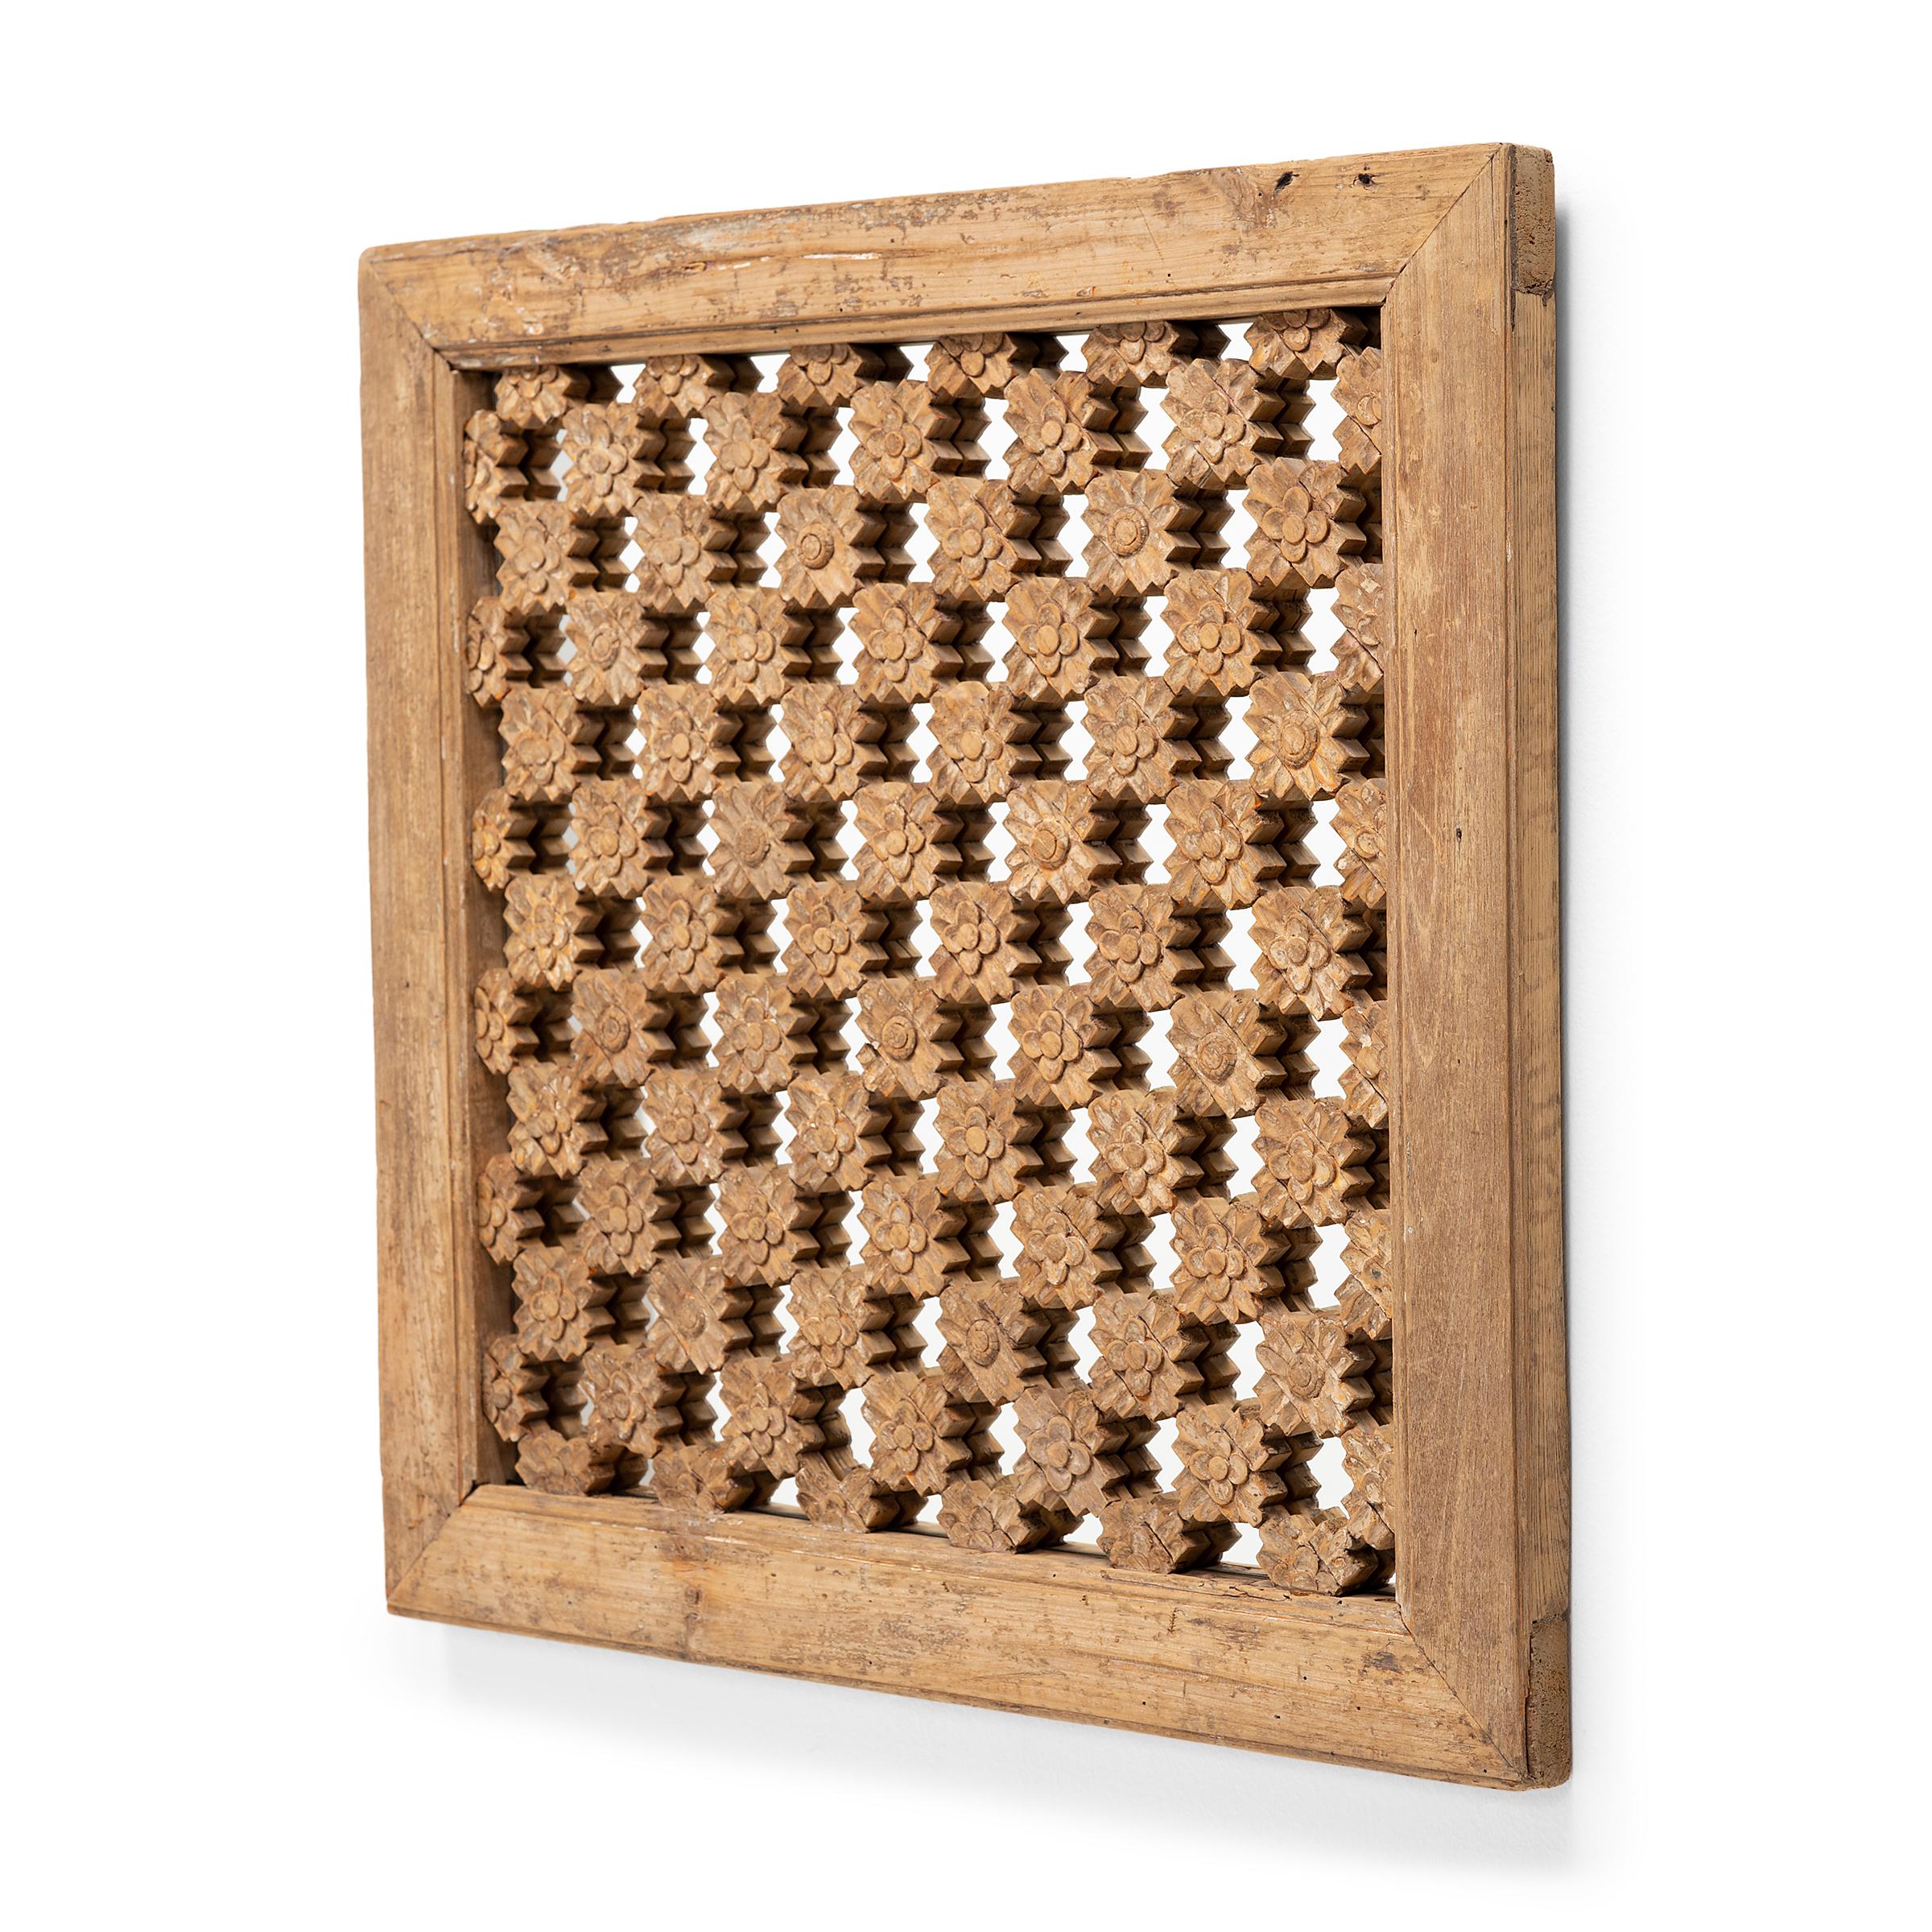 This early 20th century lattice window panel likely originated in a northern Chinese home with neutral and balanced interiors. Both functional and decorative, lattice windows allowed for fresh air and light to flow into a room while still